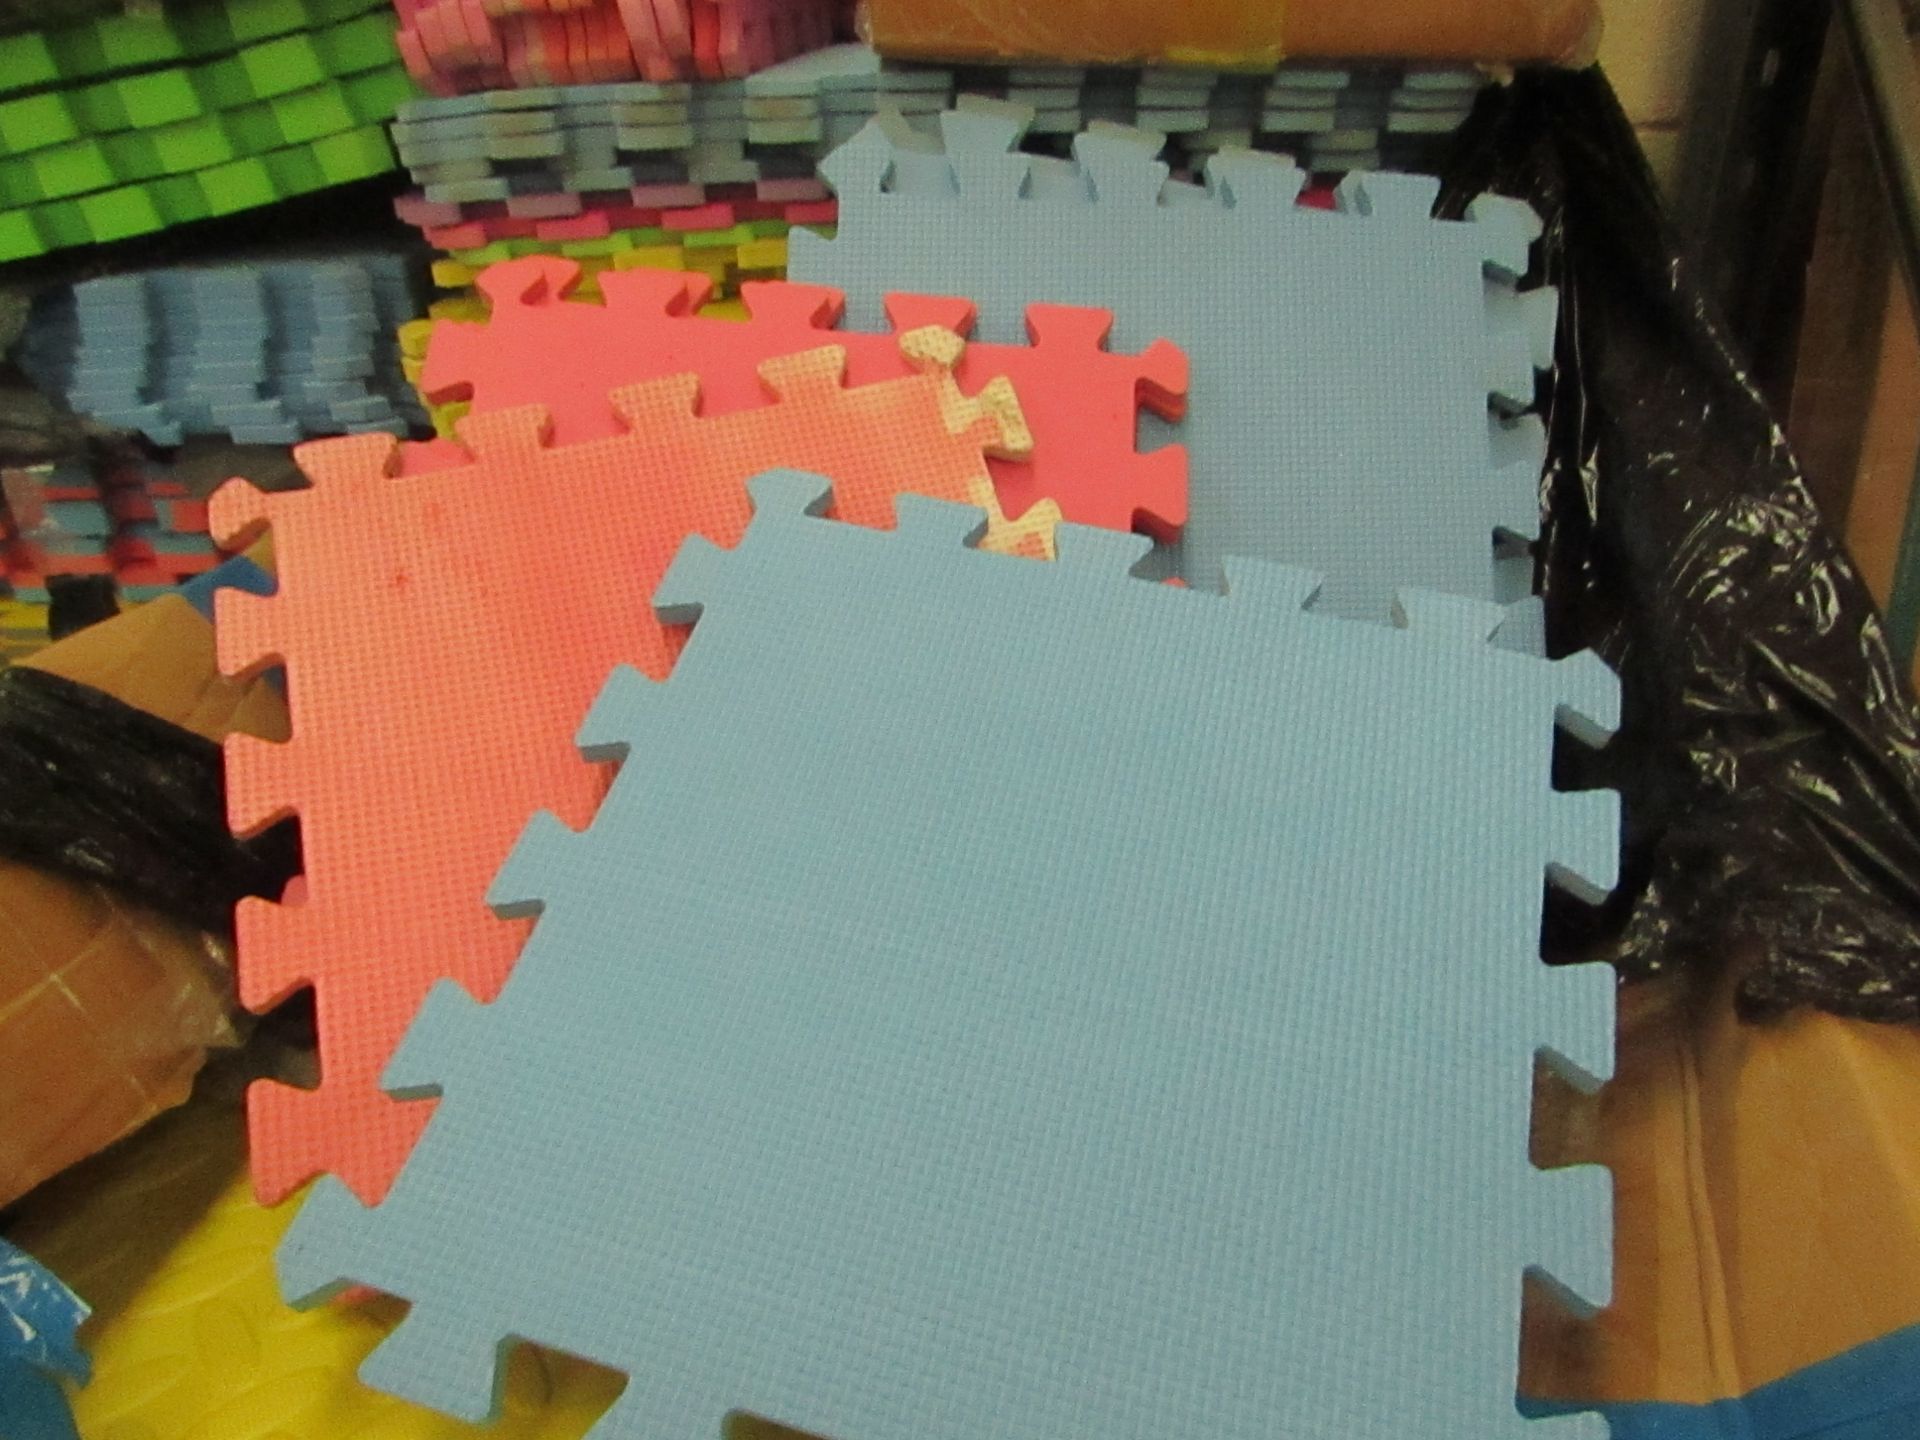 10x Square Foam Floor Mats - Sizes & Colours May Vary - Unused.